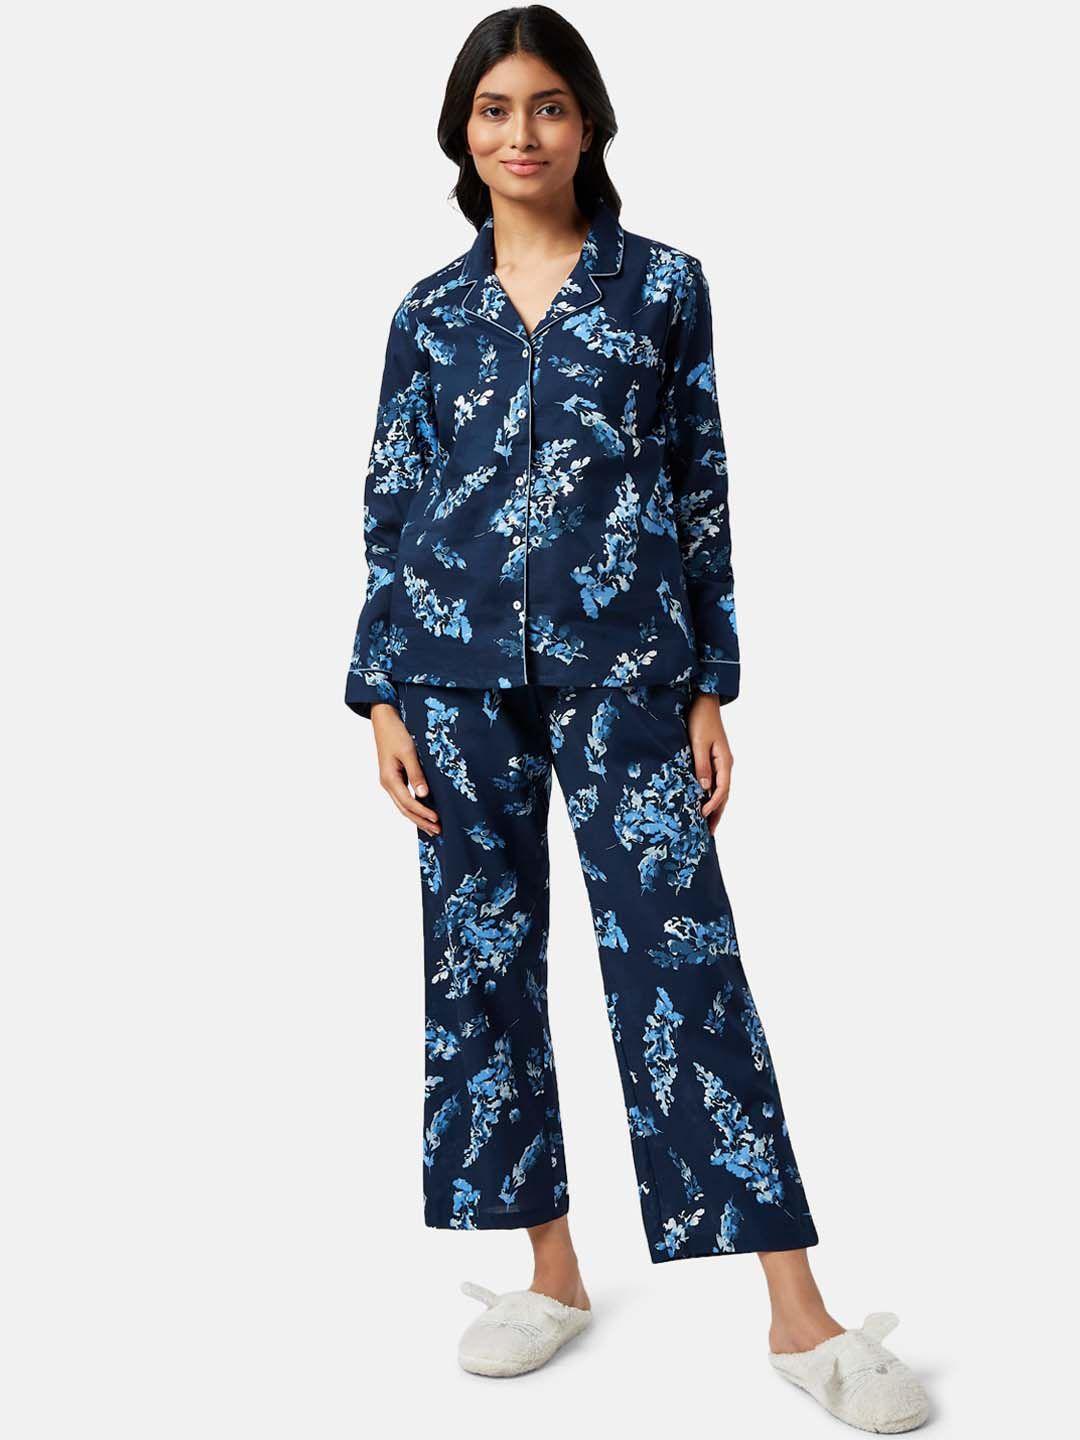 Dreamz by Pantaloons Floral Printed Night Suit